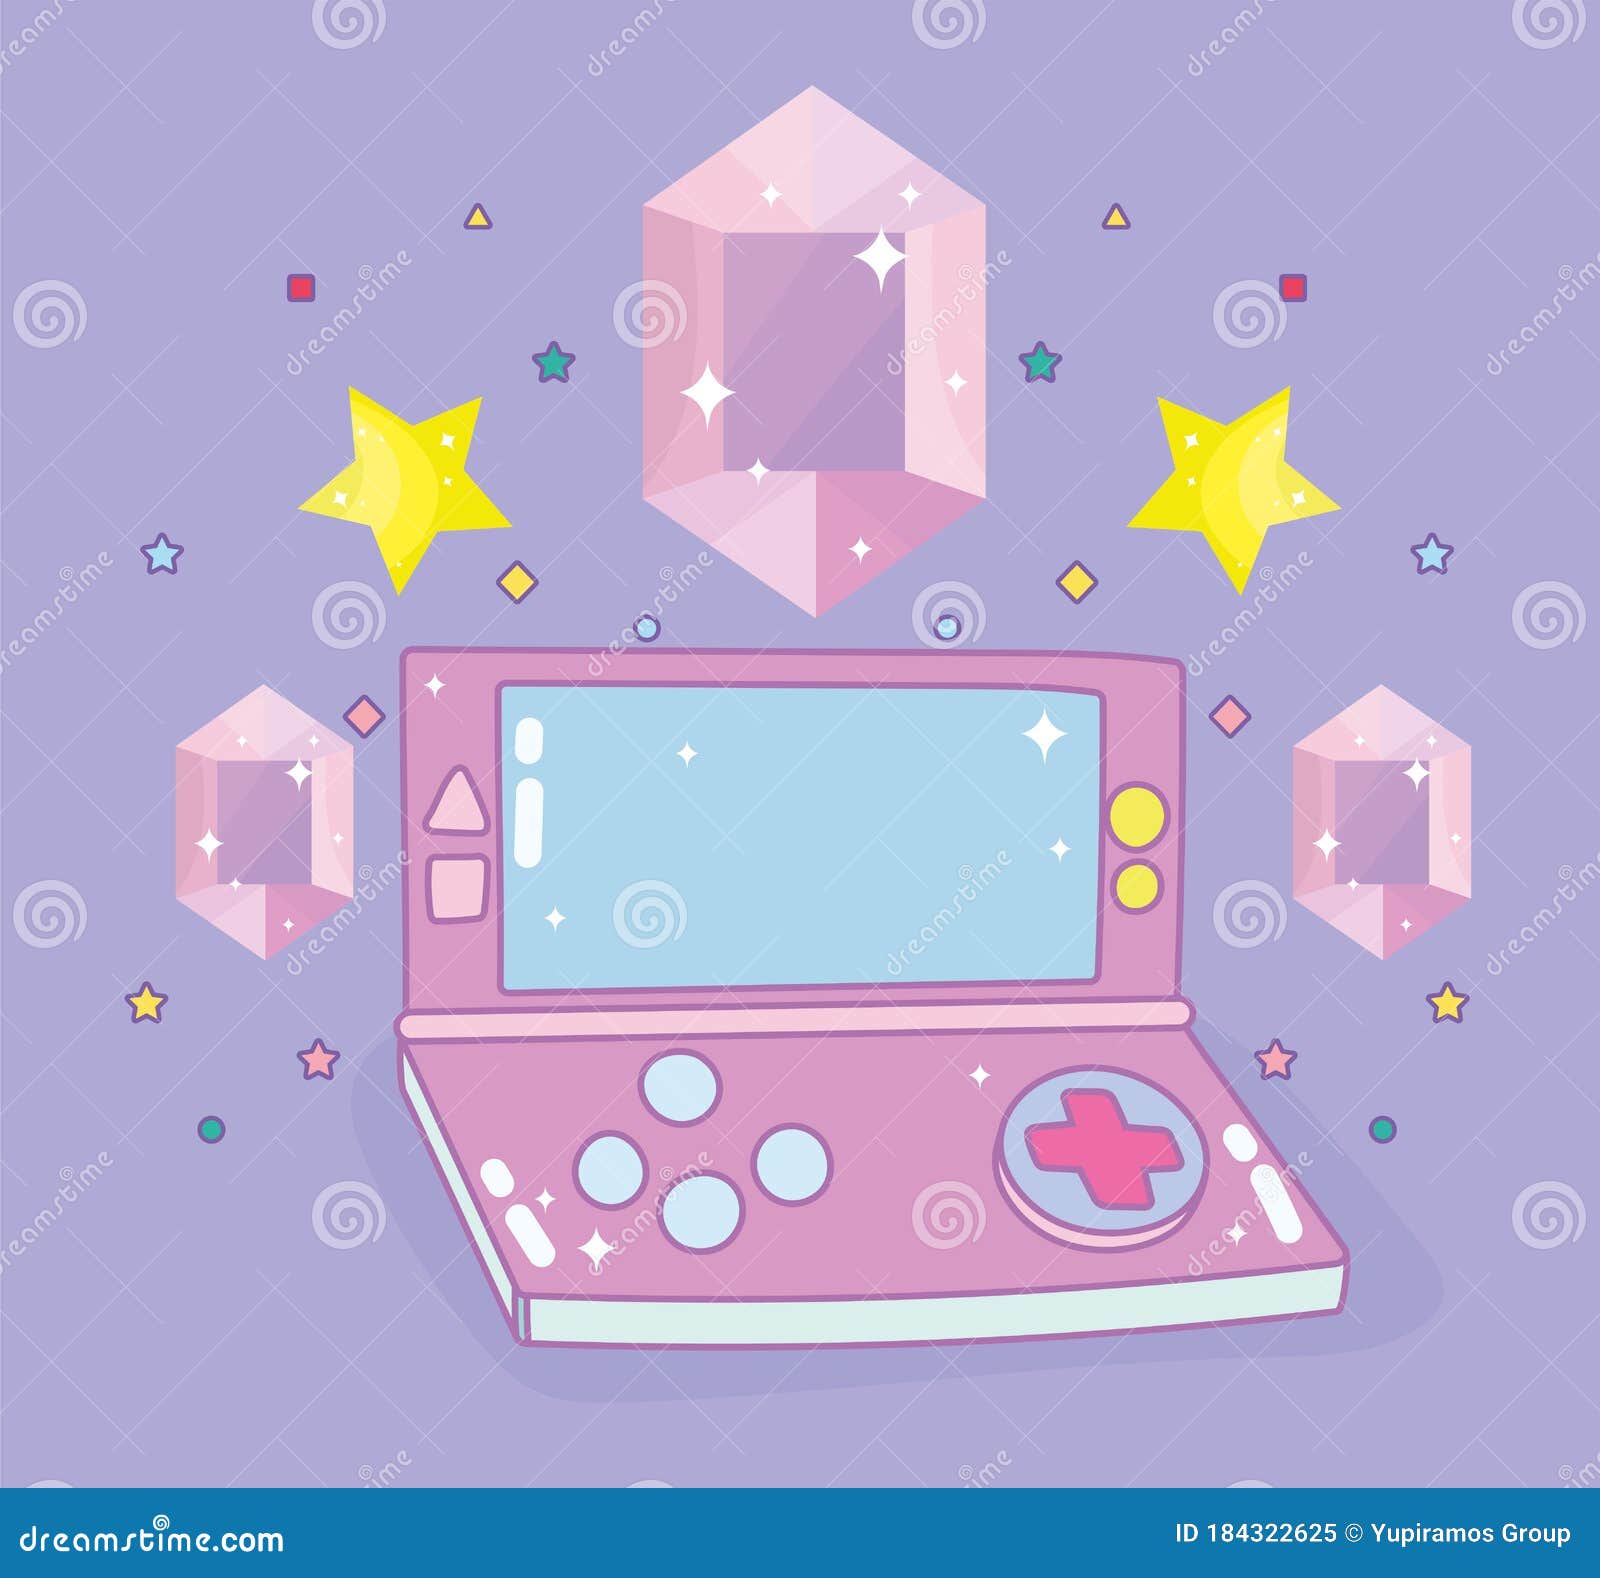 Video Game Portable Console Gems and Stars Entertainment Gadget Device  Electronic Cartoon Stock Vector - Illustration of gadget, play: 184322625